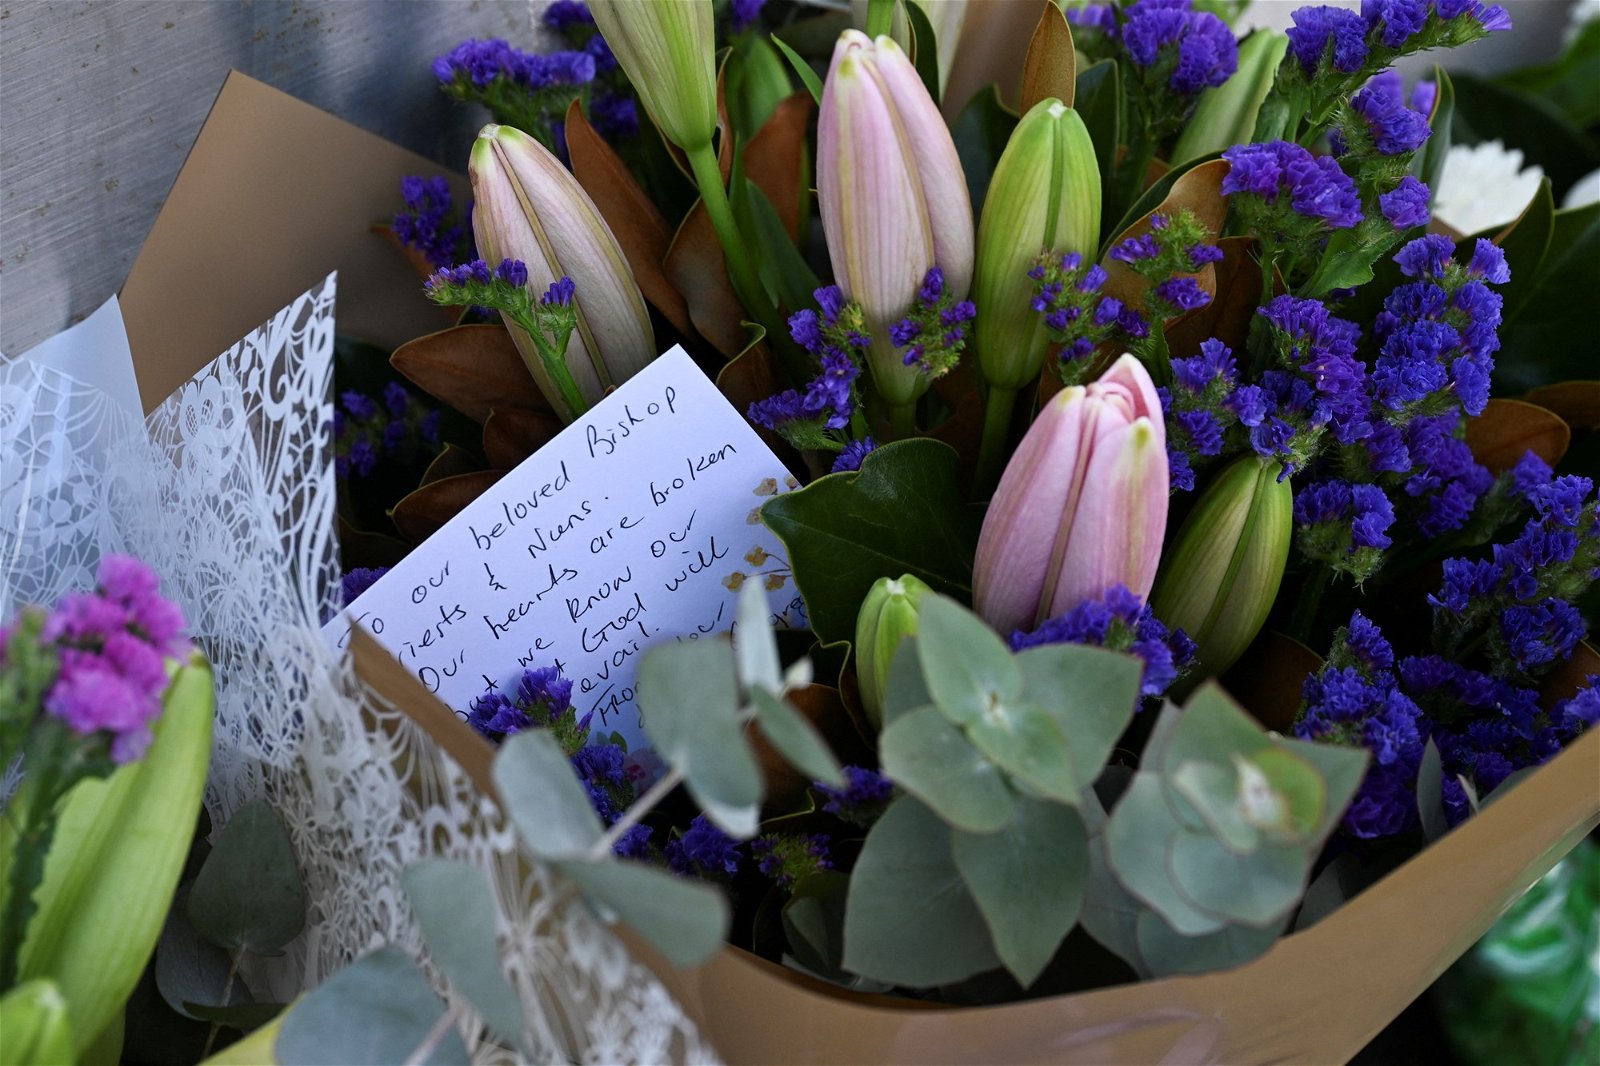 Closeup of flowers and a note.